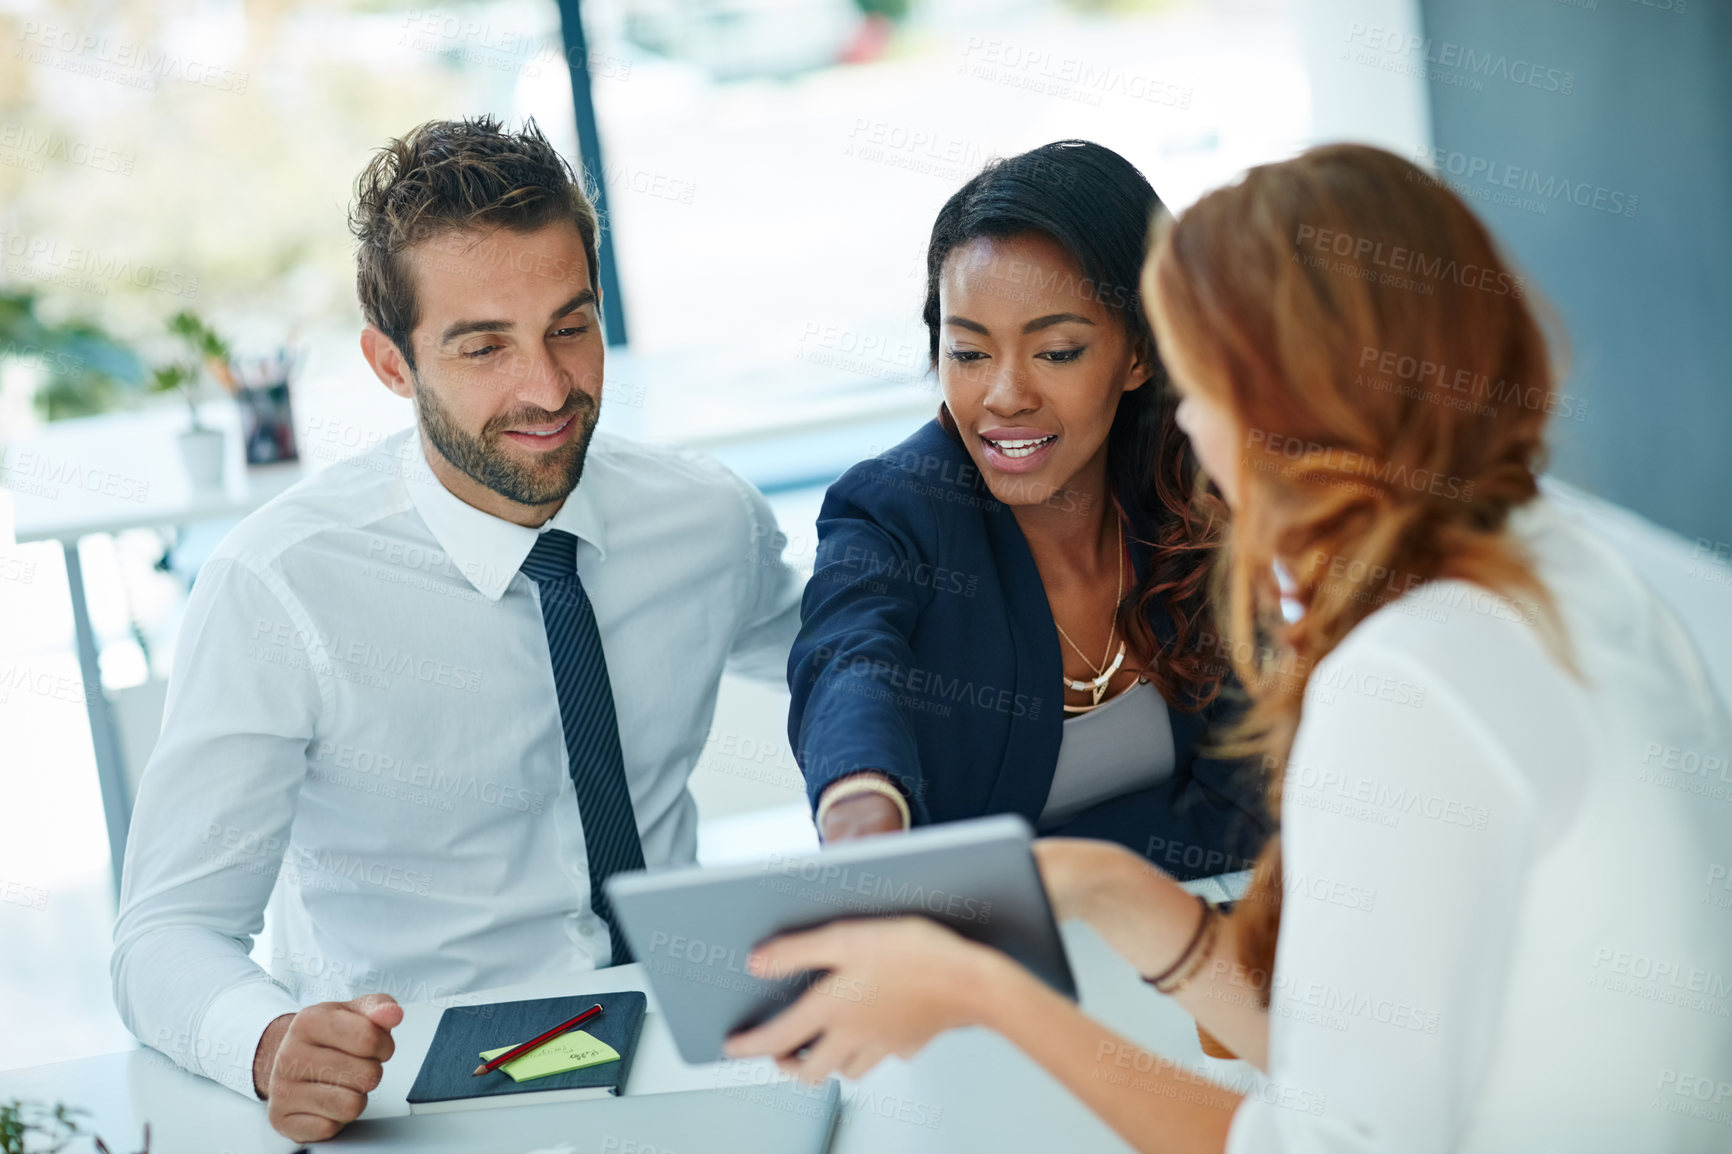 Buy stock photo Cropped shot of a young couple meeting with their advisor in an office